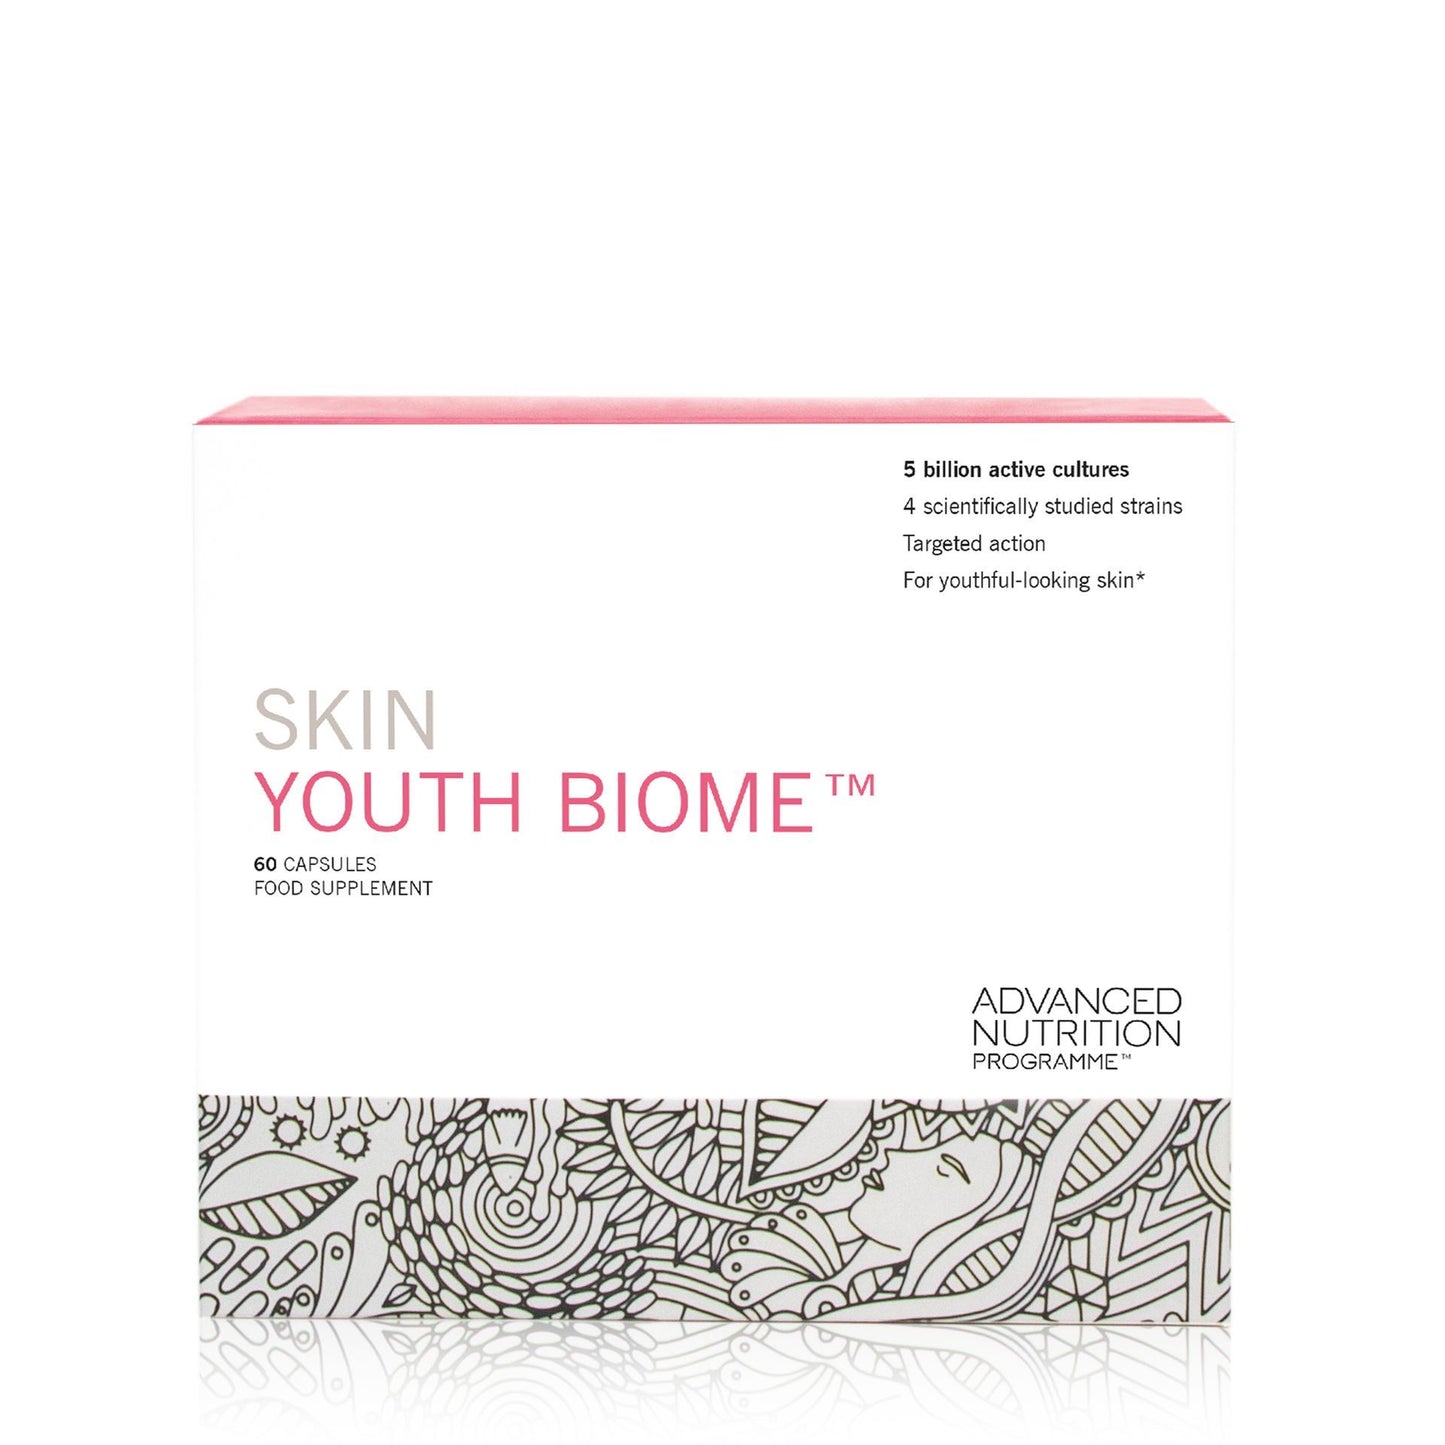 Advanced Nutrition Programme SKIN YOUTH BIOME™